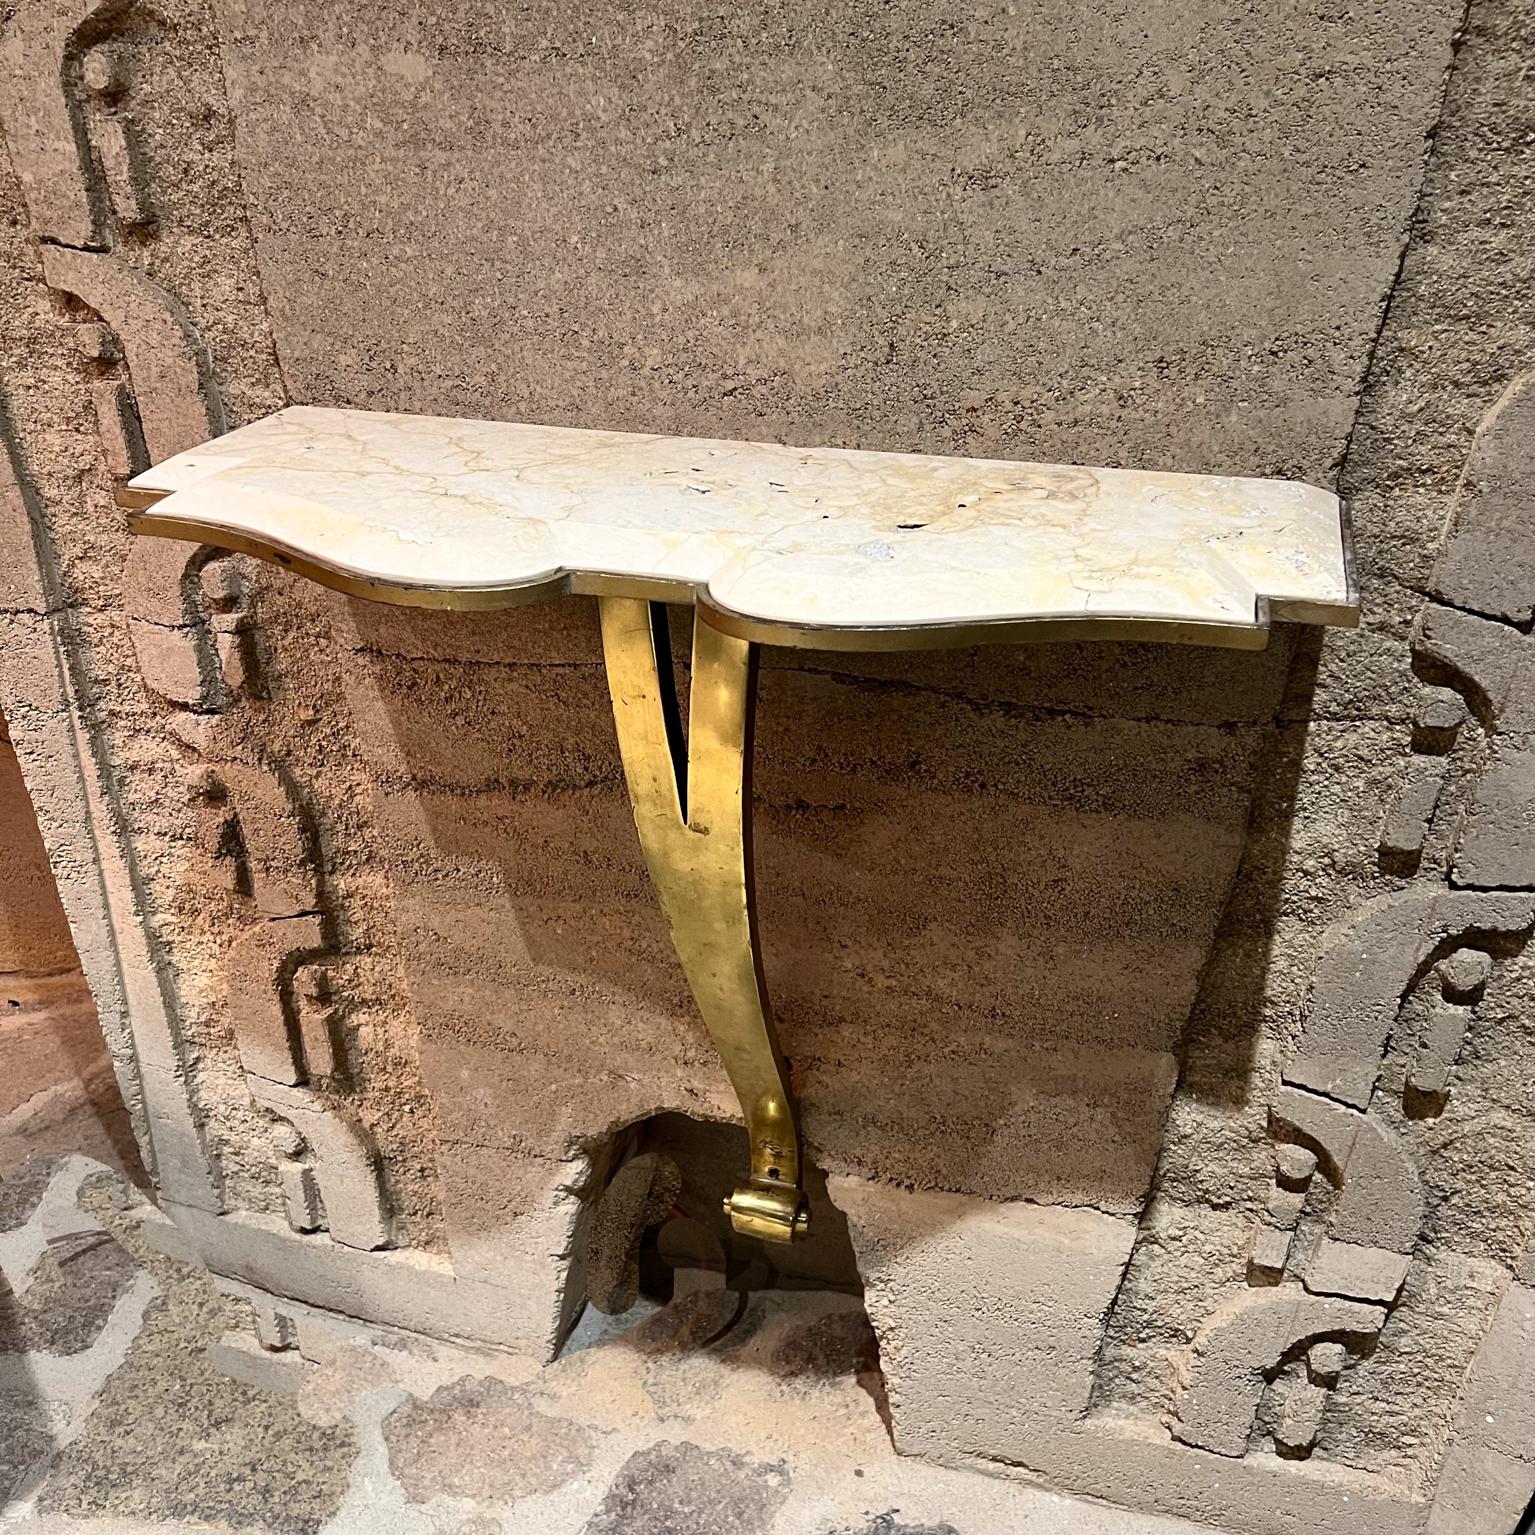 1950s Arturo Pani Console Table Mexico City
Sculptural Bronze Gilt Iron Travertine with beveled edge
28 h x 30 w 12.25 d
Original preowned vintage condition. 
Travertine tabletop new.
Review images provided.
Delivery to LA OC SF Palm Springs